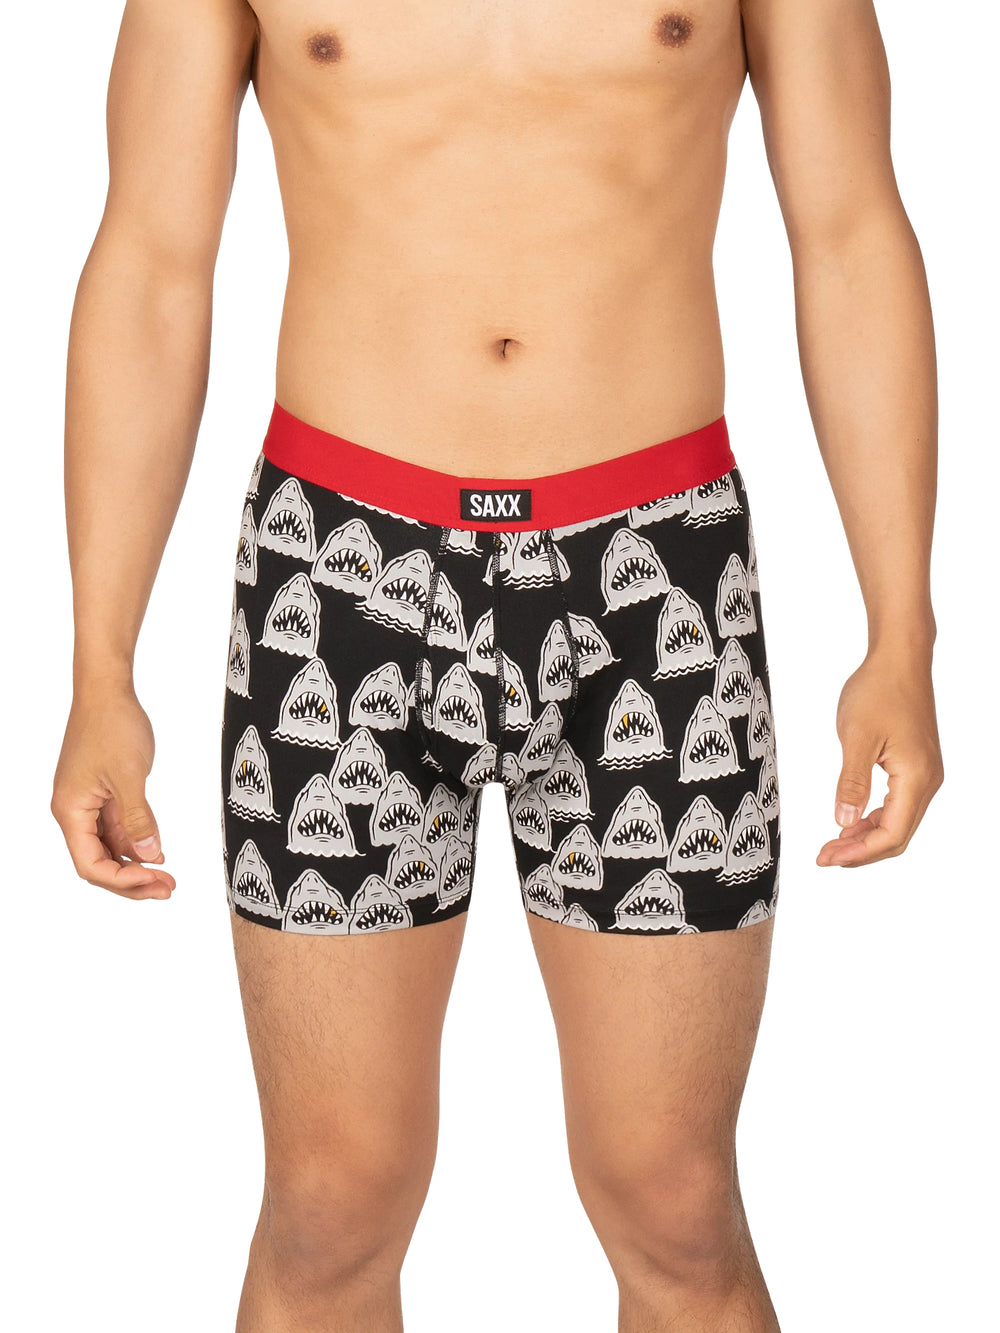 SAXX DAY TRIPPER BOXER BRIEFING - CLEARANCE